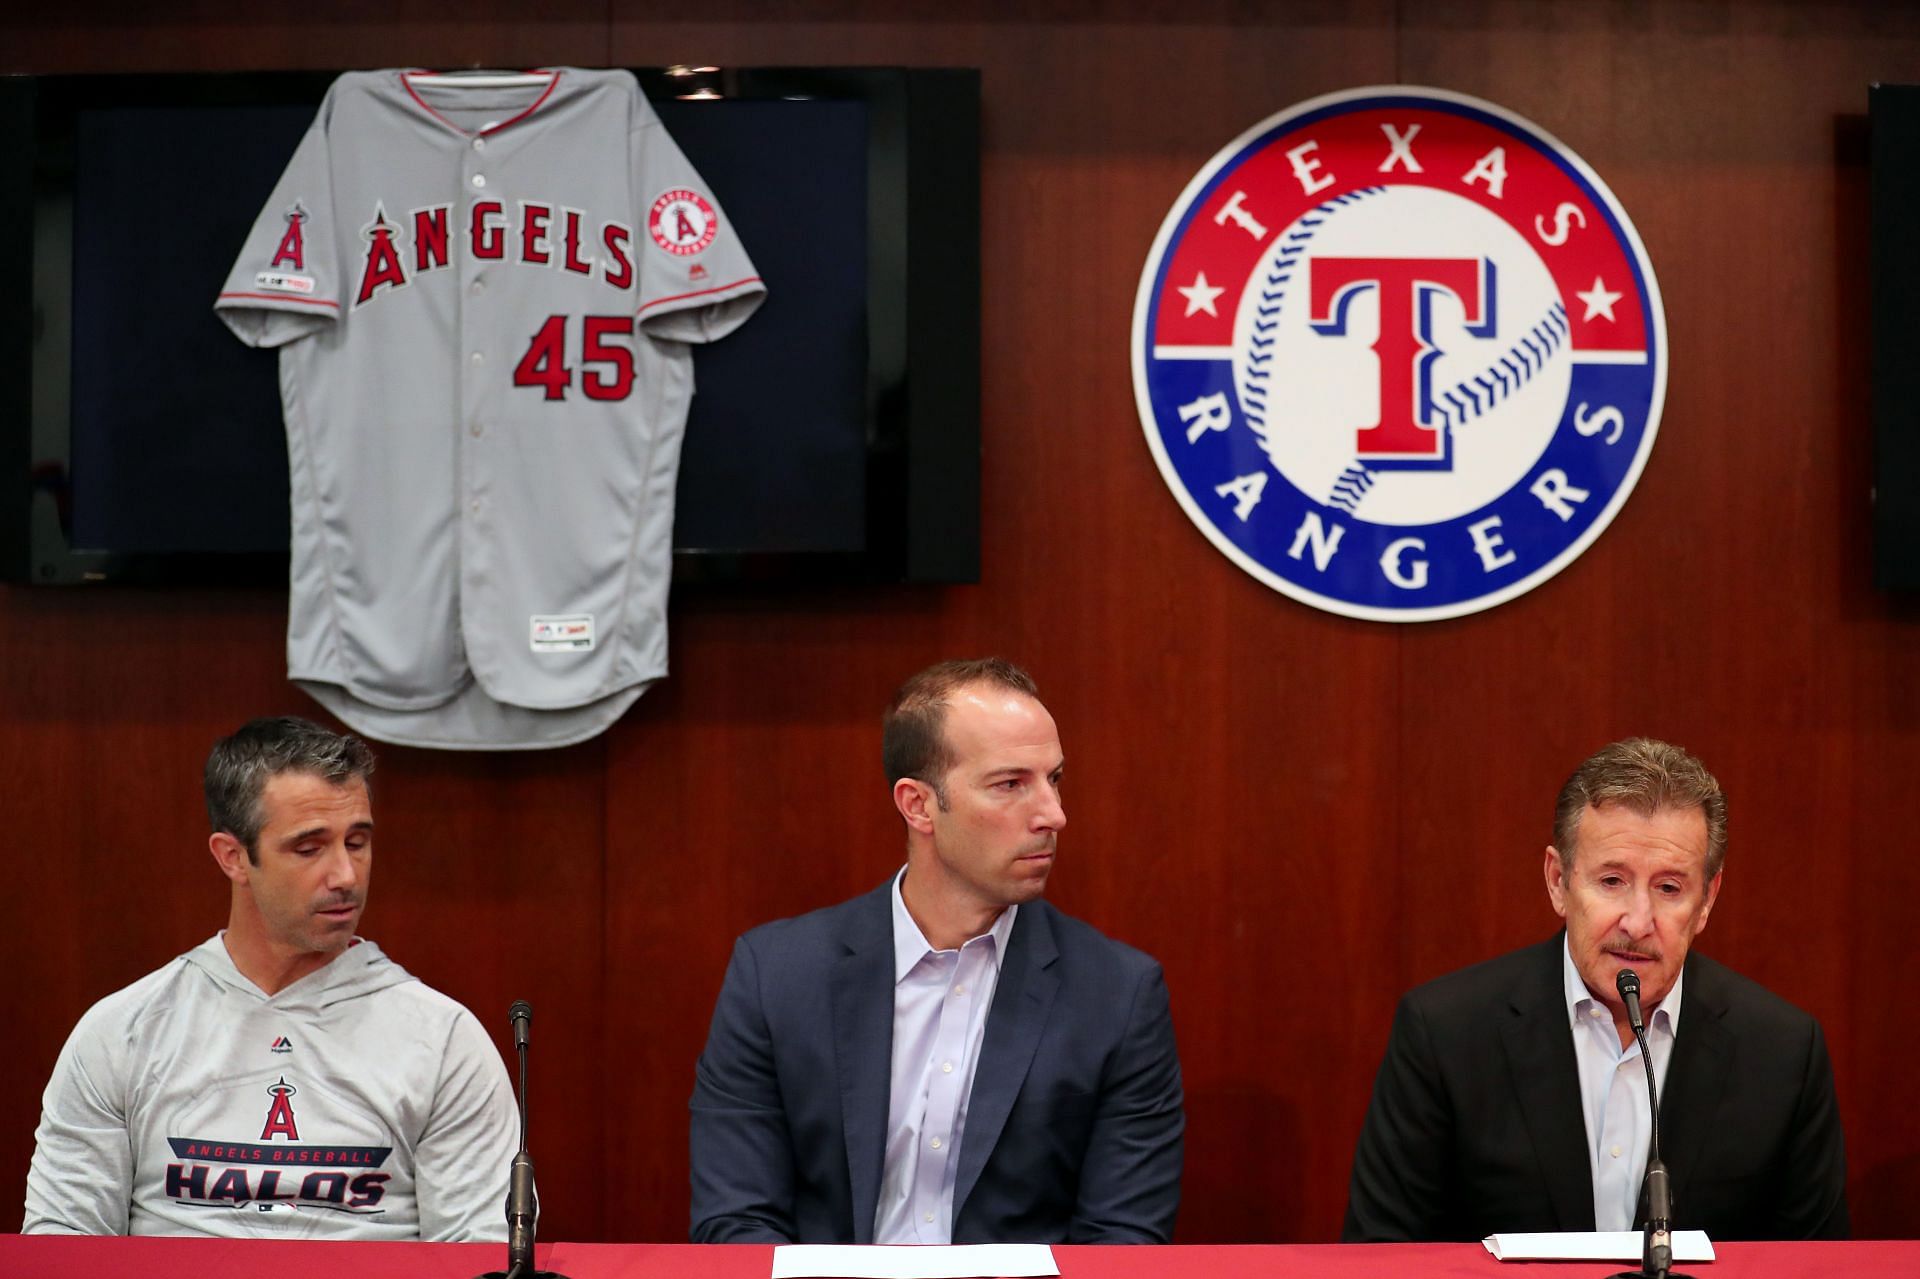 Los Angeles Angels of Anaheim v Texas Rangers: ARLINGTON, TEXAS - JULY 02: (L-R) Manager Brad Ausmus #12 of the Los Angeles Angels, General Manager Billy Eppler, team owner Arte Moreno talk with the media during a press conference held to address the death of pitcher Tyler Skaggs at Globe Life Park in Arlington on July 02, 2019, in Arlington, Texas. (Photo by Tom Pennington/Getty Images)